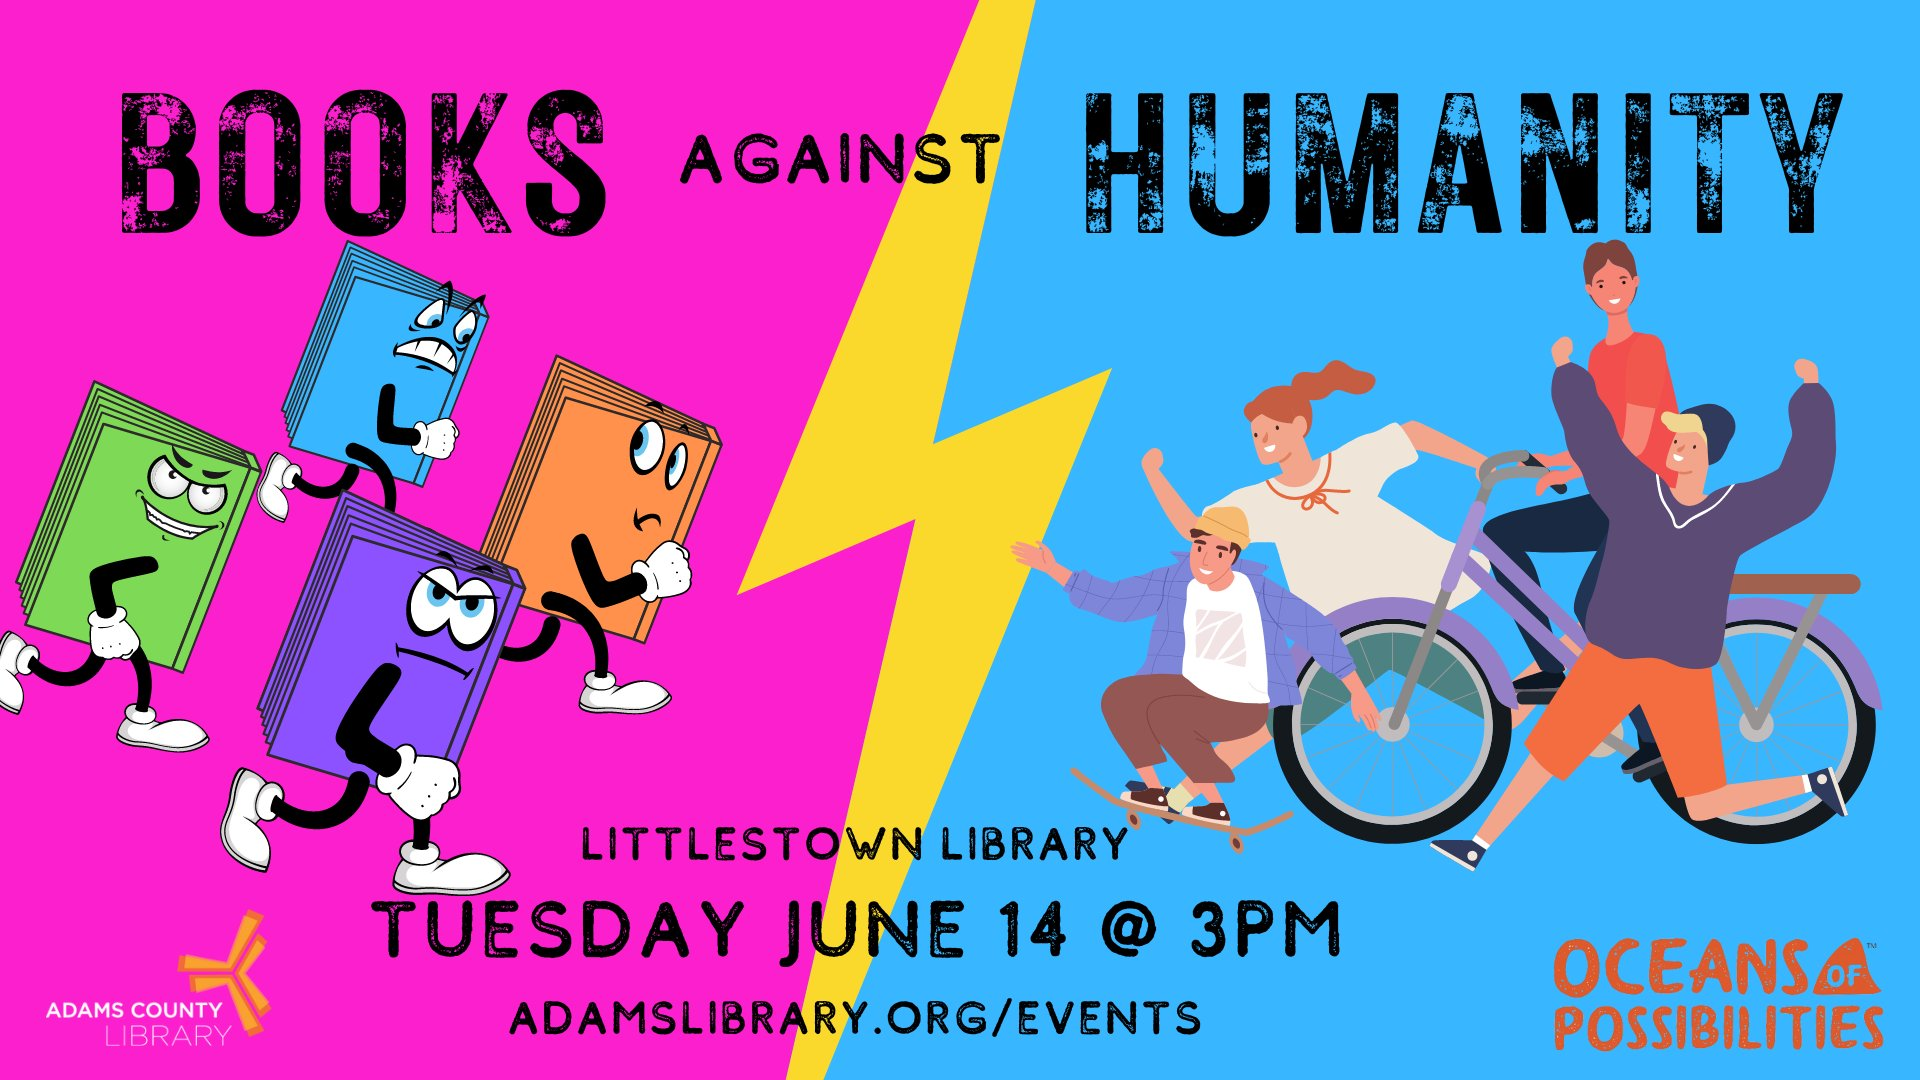 Books Against Humanity